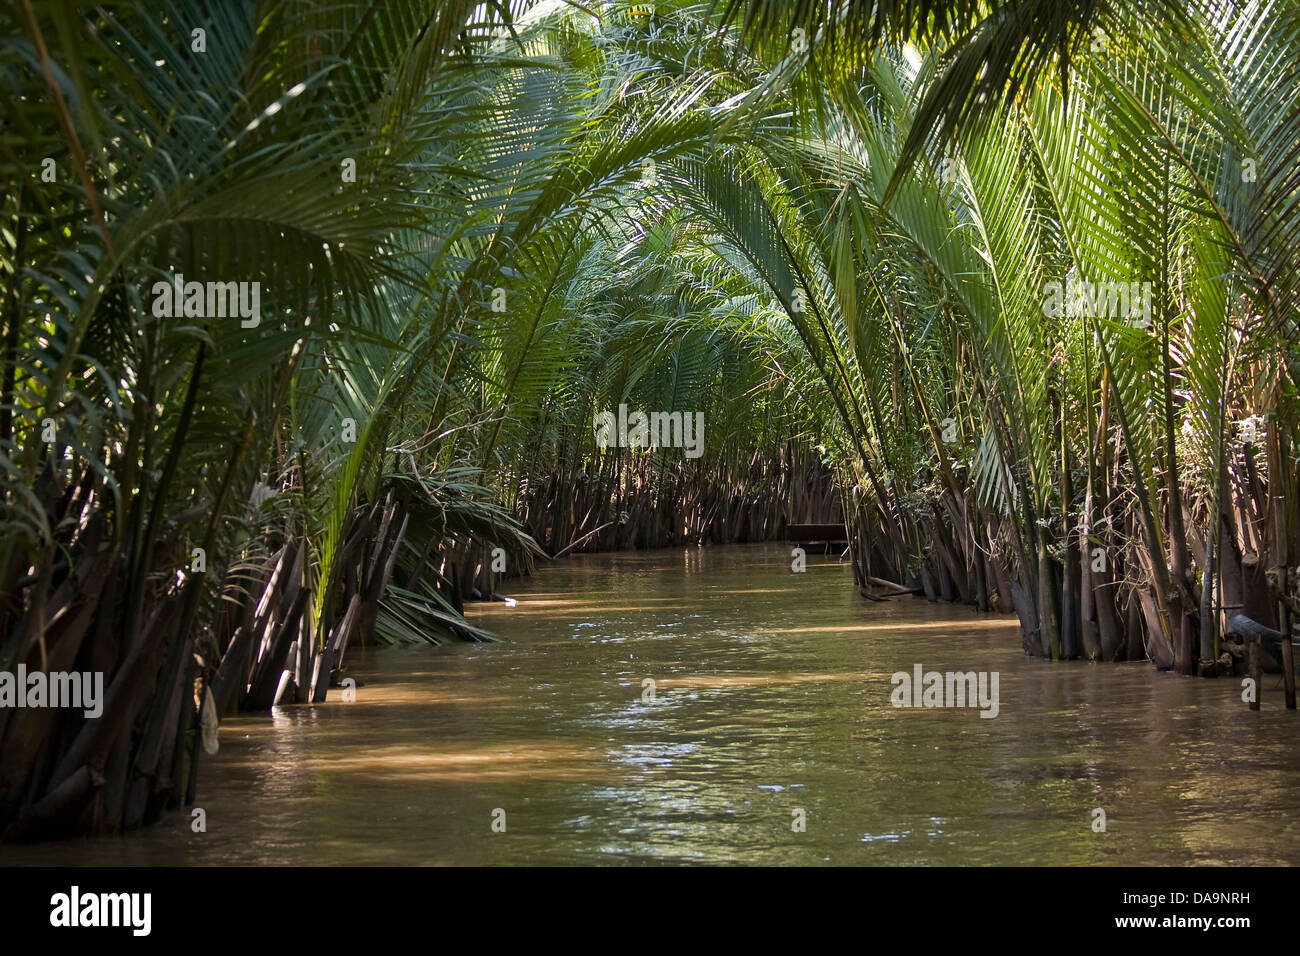 Asia, Can, river, Mekong delta, South-East Asia, Tho, Can Tho, canal, Vietnam, Vietnamese, water Stock Photo